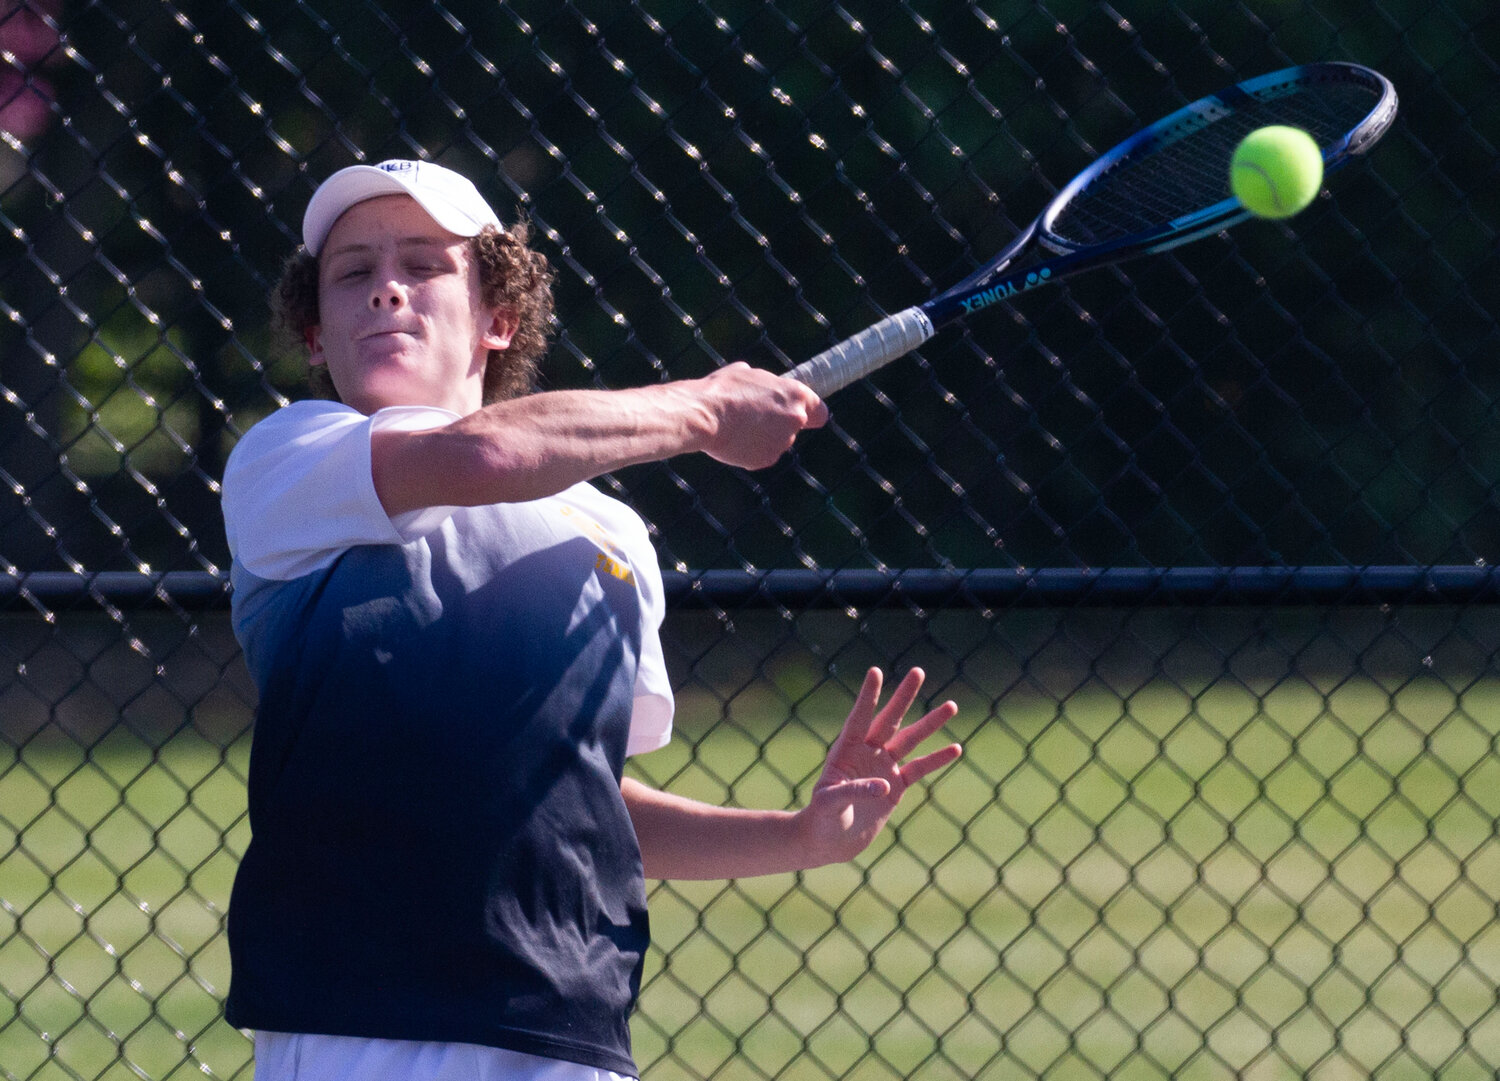 Barrington's Charlie Martin won his match as second singles and helped the Eagles advance to the state finals.